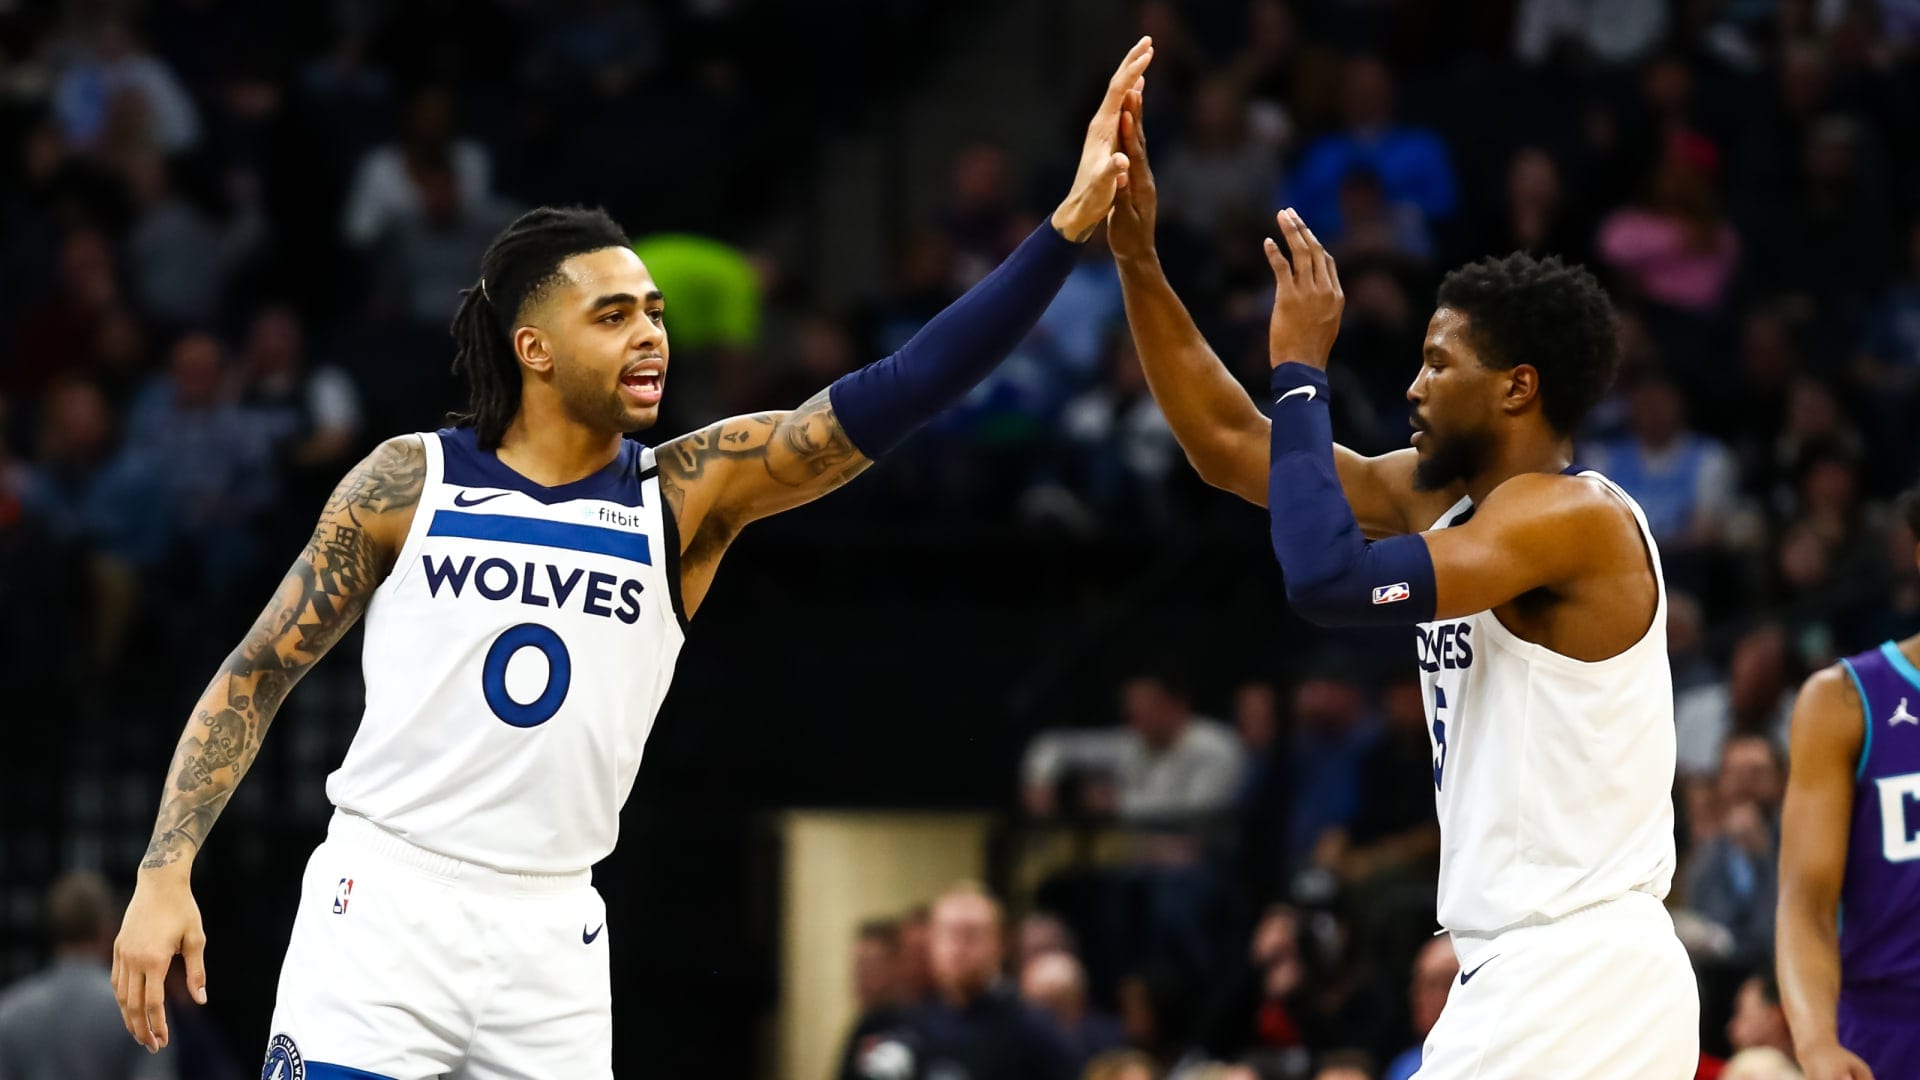 The Minnesota Timberwolves have postponed their game vs the Nets